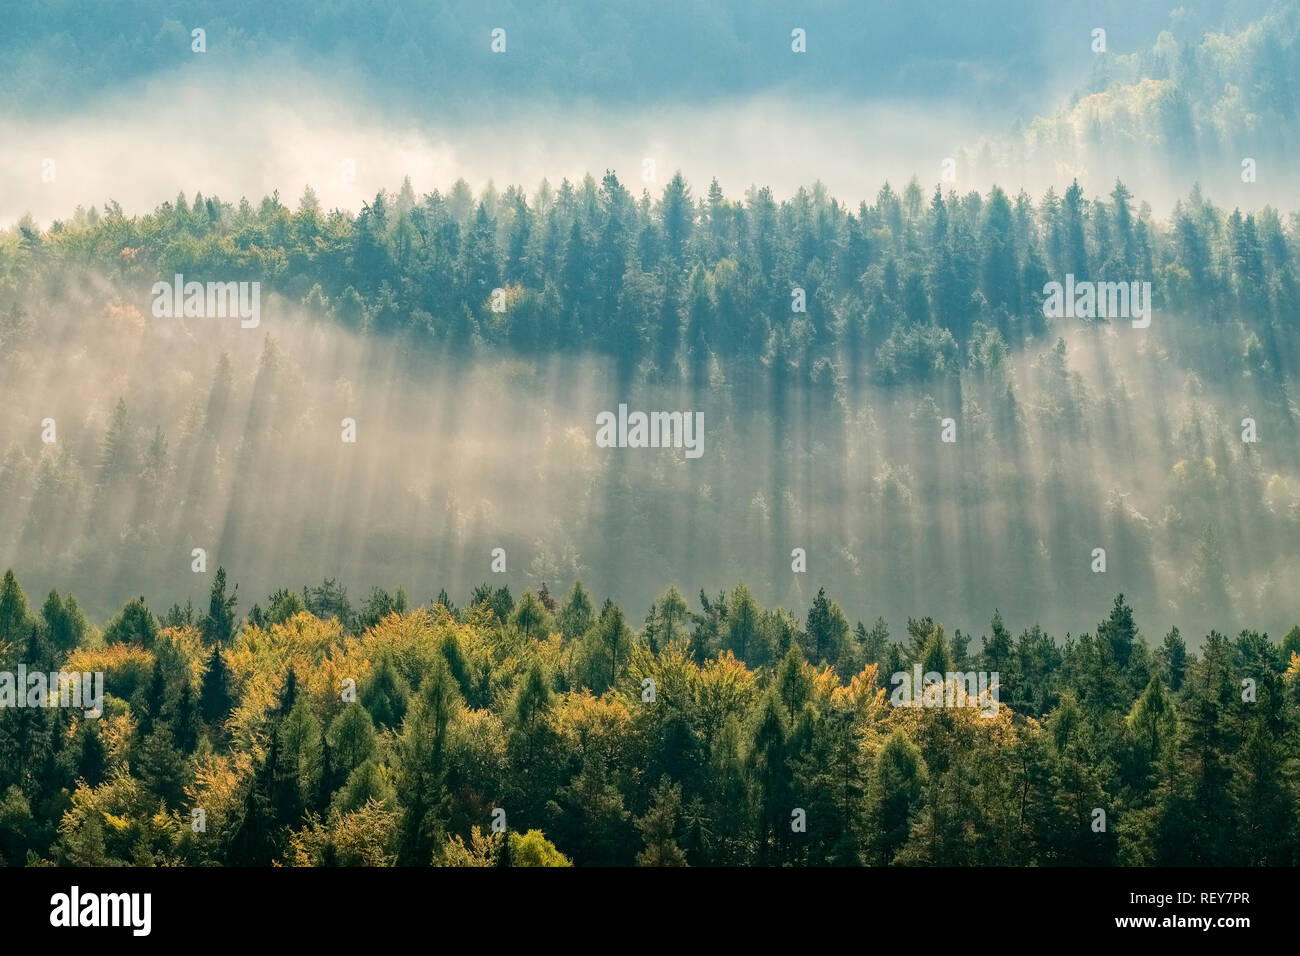 Landscape in the National Park Sächsische Schweiz with trees and fog at sunrise Stock Photo